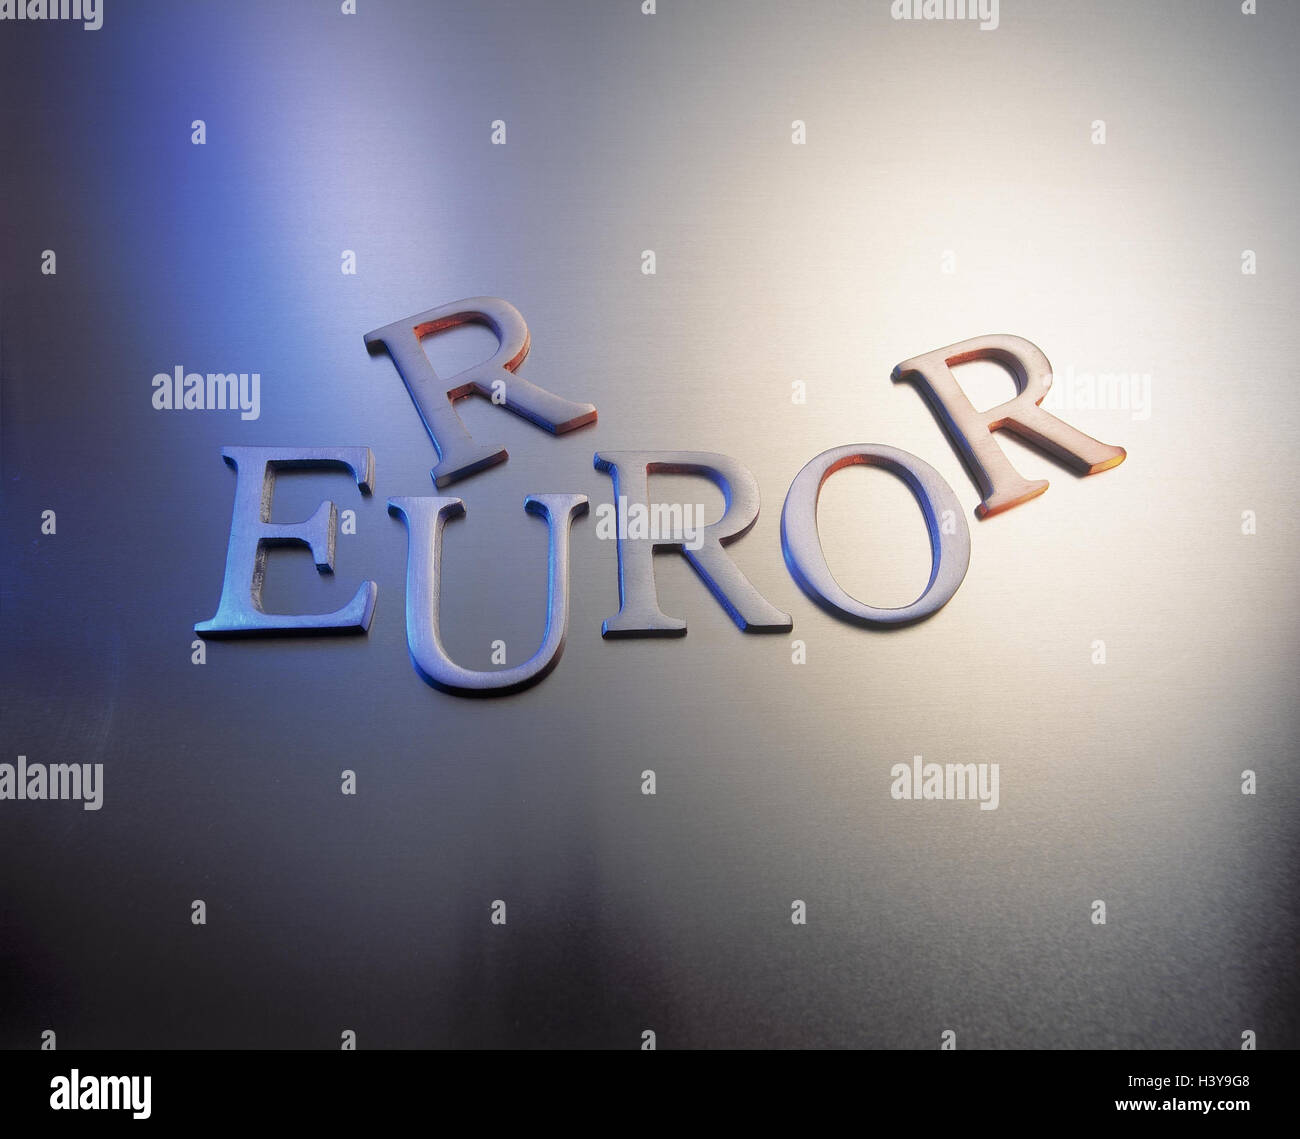 Letters, stroke, euro, Error currency, monetary union, single currency, changeover to the new currency, mistake, error, error message, wrong, 'Eurror', finances, economy Stock Photo